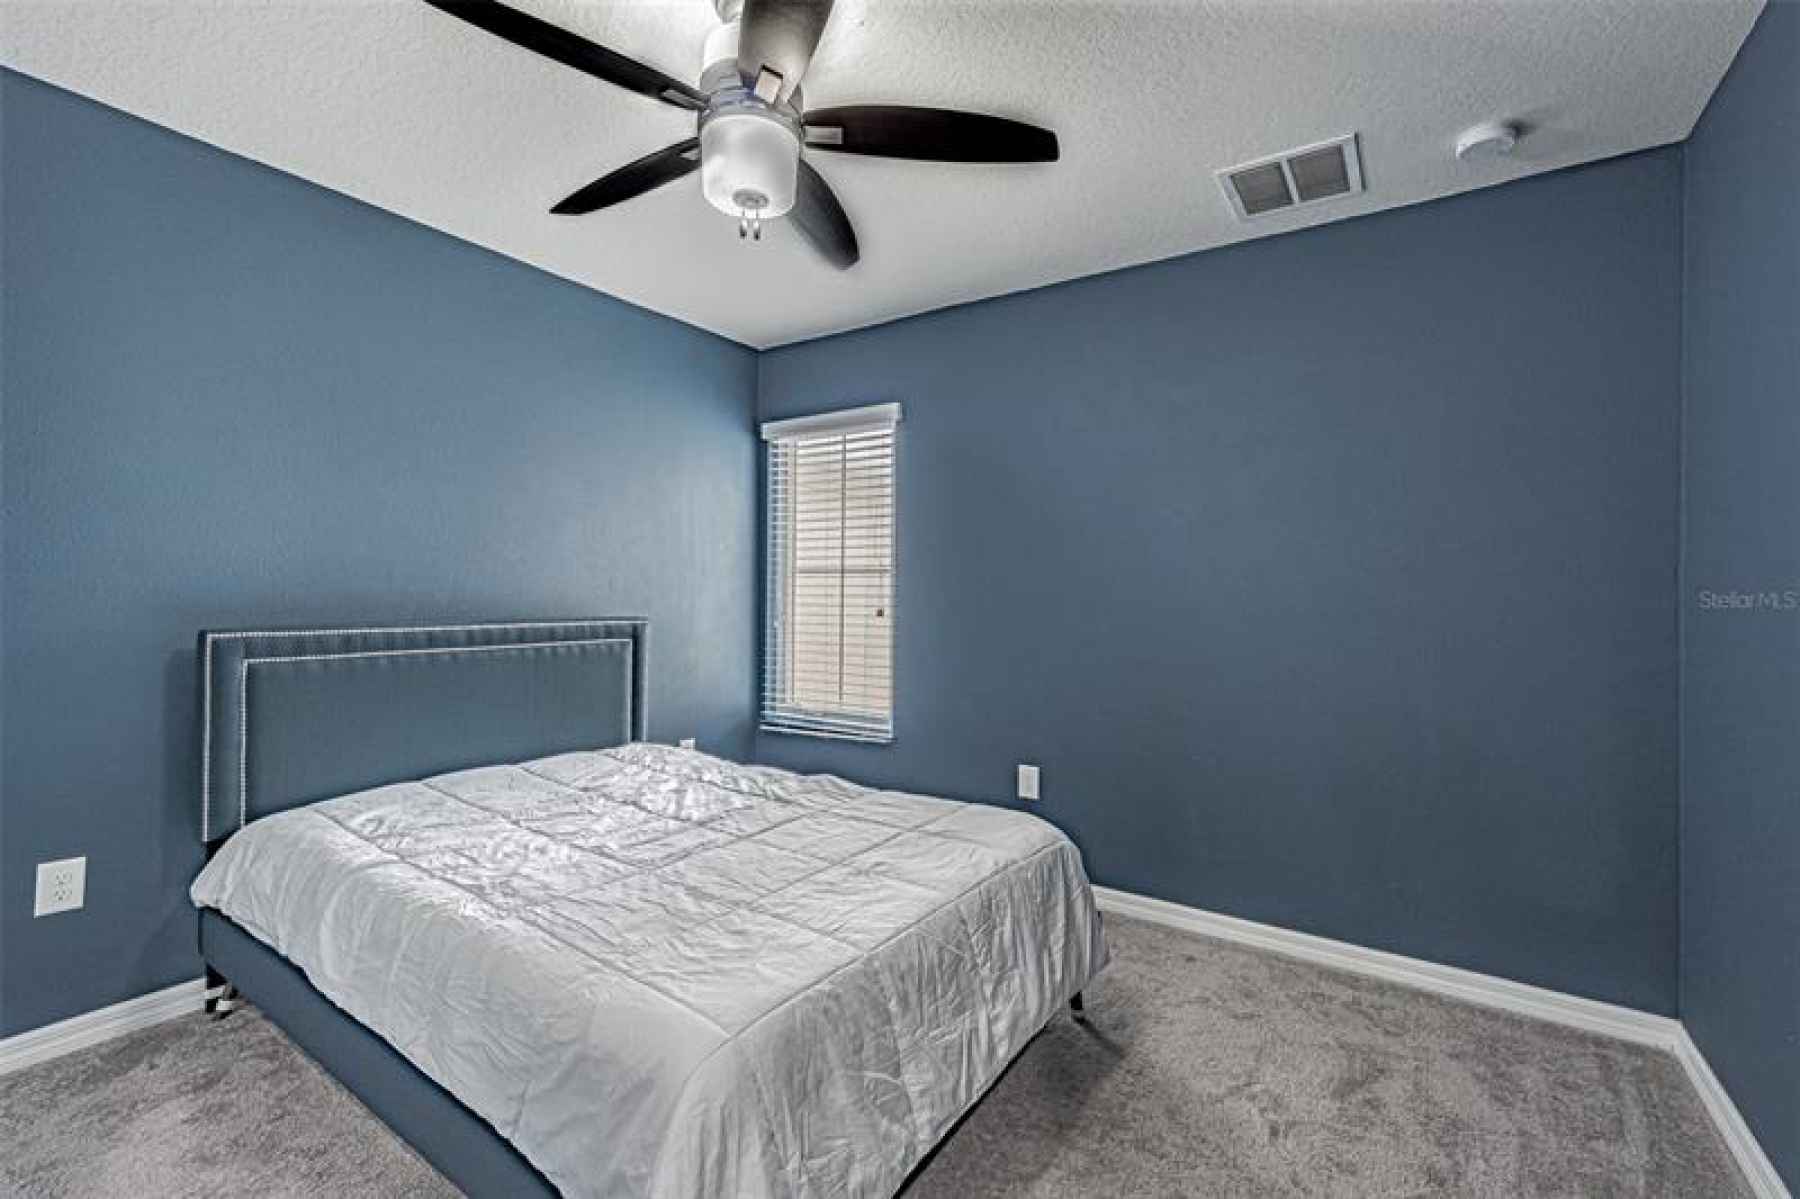 2 of 2 South facing bedrooms with ceiling fan